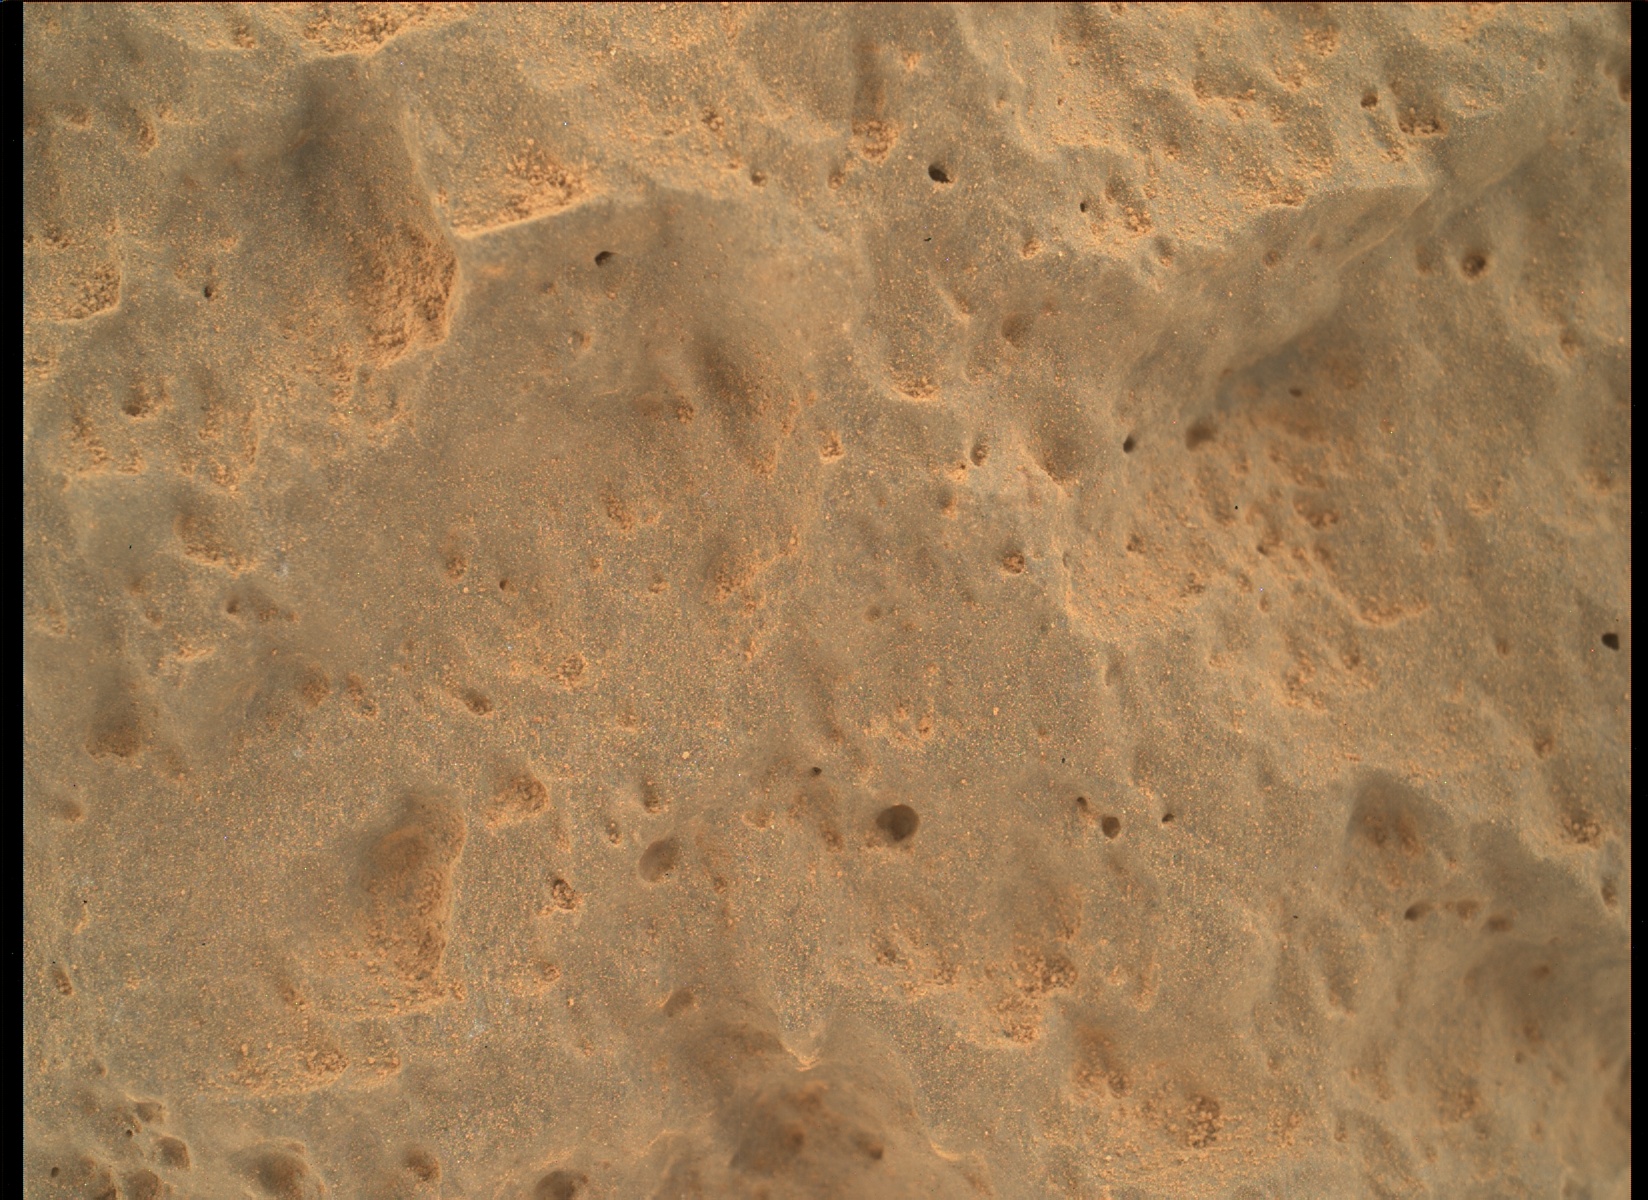 Nasa's Mars rover Curiosity acquired this image using its Mars Hand Lens Imager (MAHLI) on Sol 46